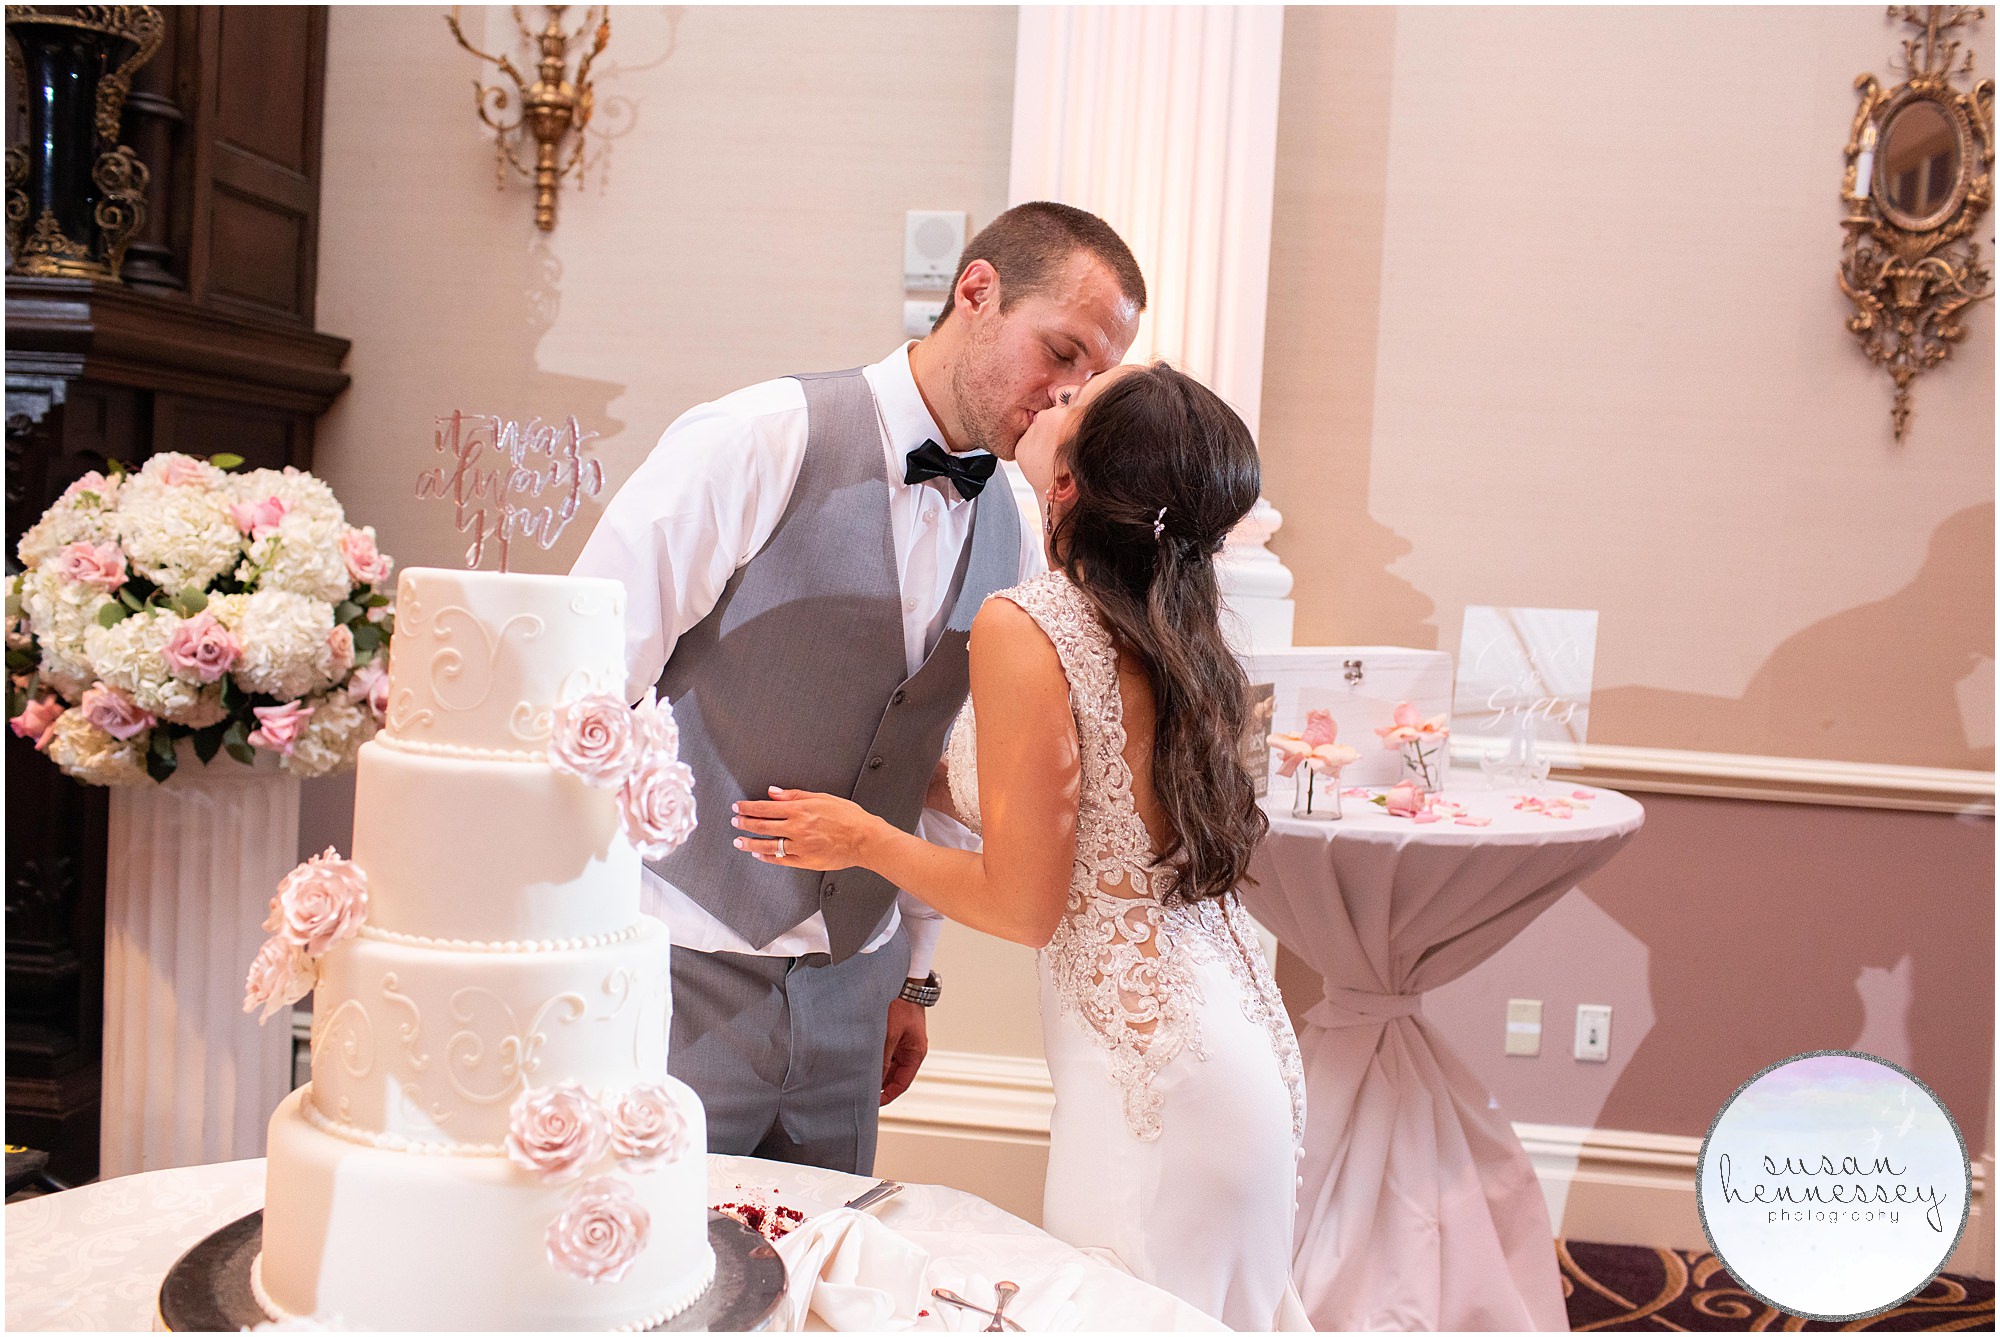 A bride and groom kiss after cutting their cake at their Palace at Somerset Park wedding